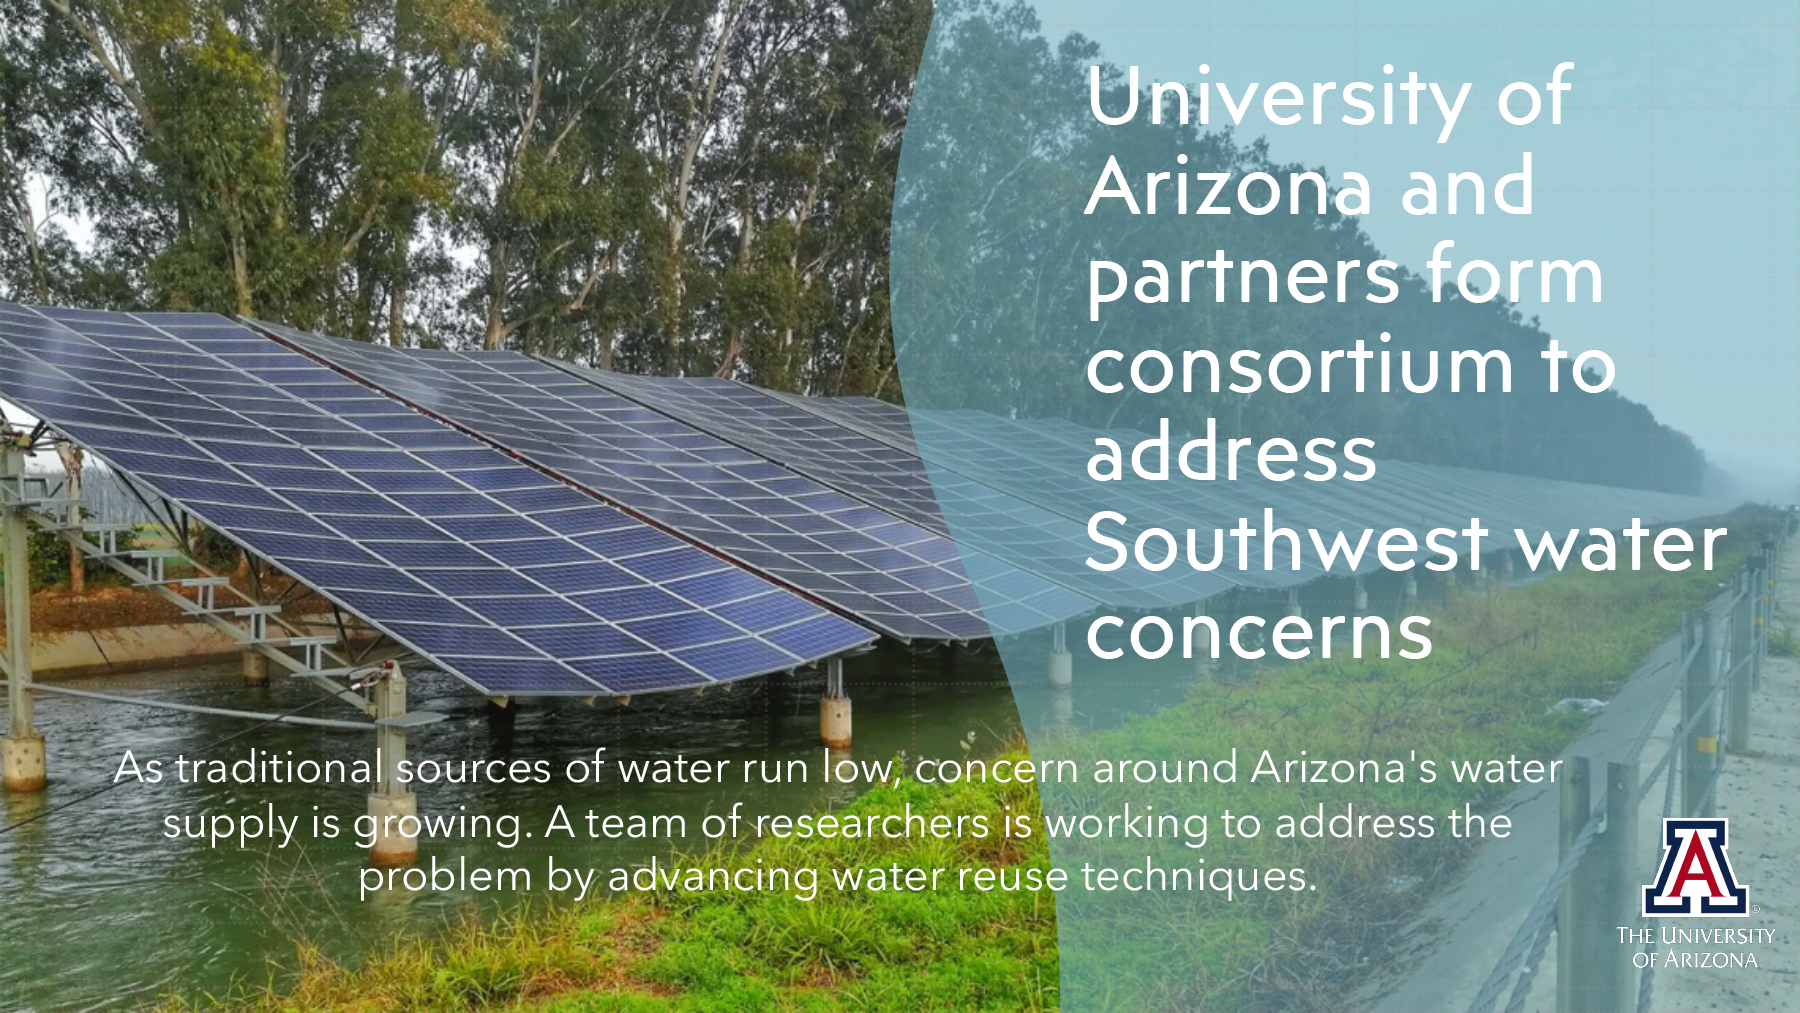 University of Arizona and partners form consortium to address Southwest water concerns